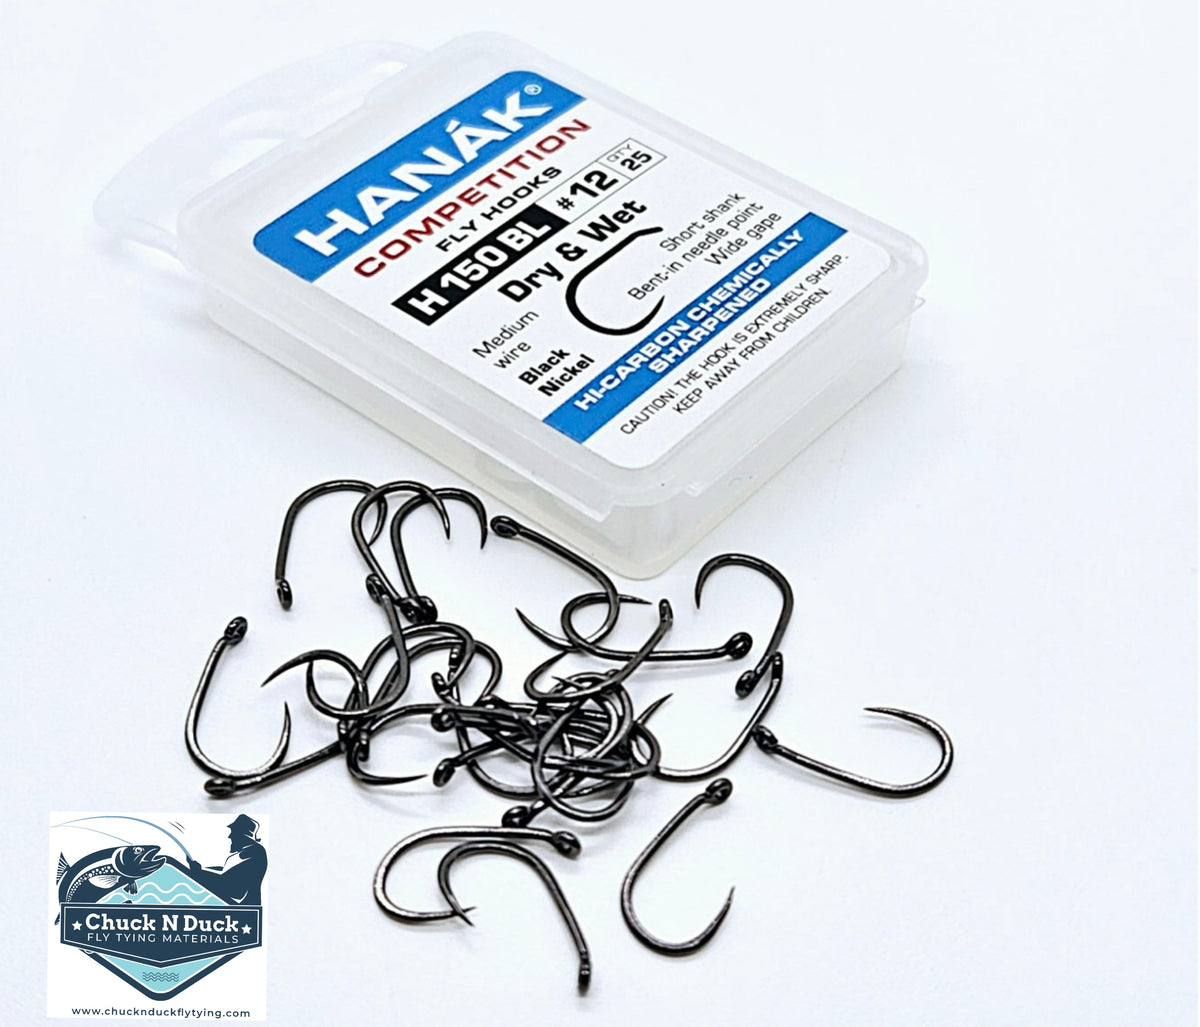 Hanak Competition H 150 BL Hook — Chuck N Duck Fly Tying Materials